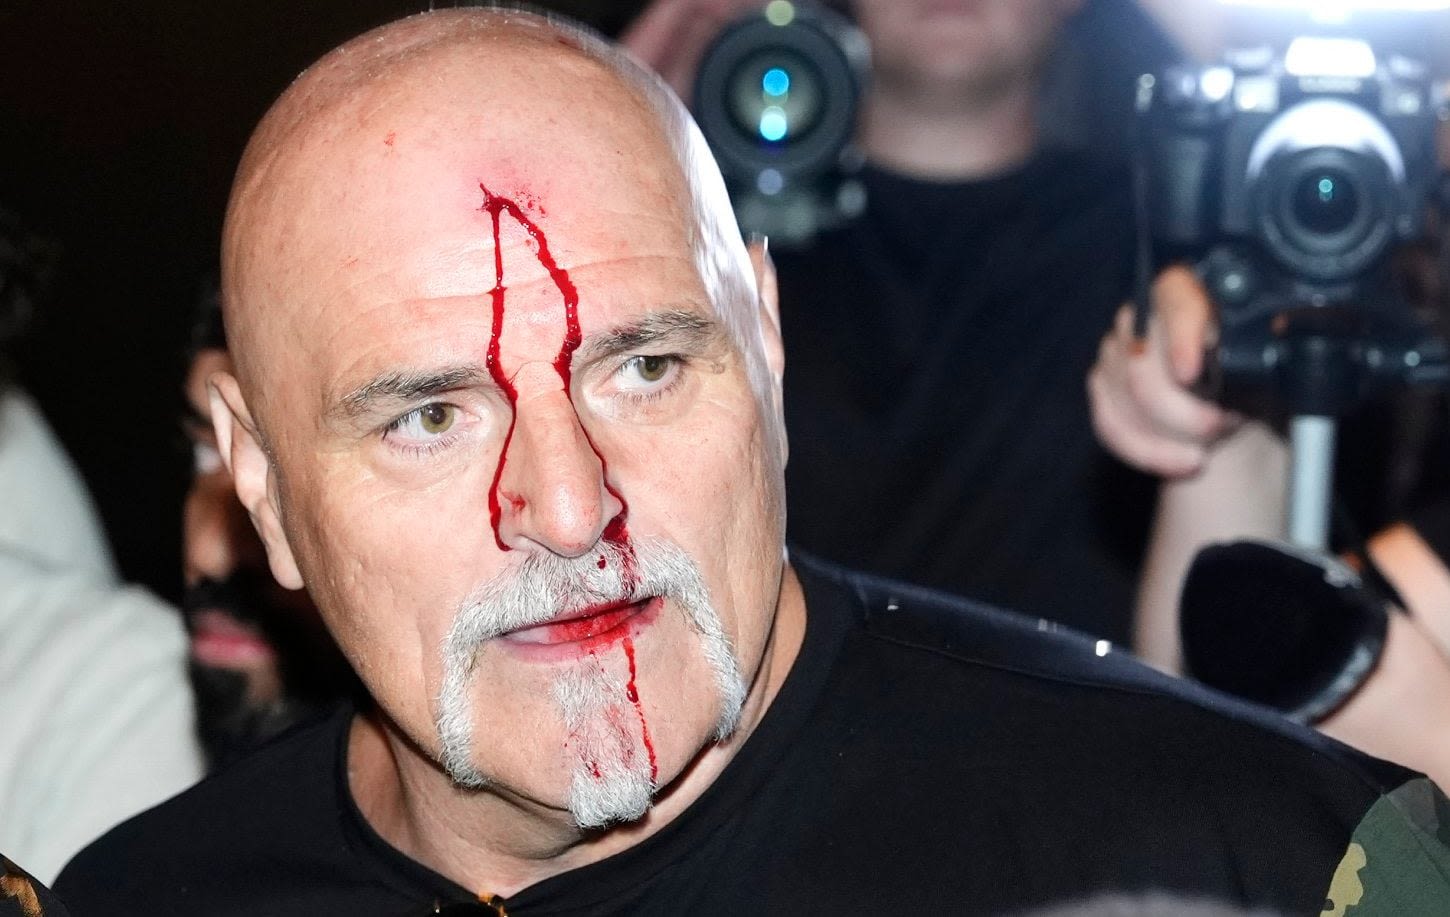 John Fury interview: My one regret in life is gouging a man’s eye out